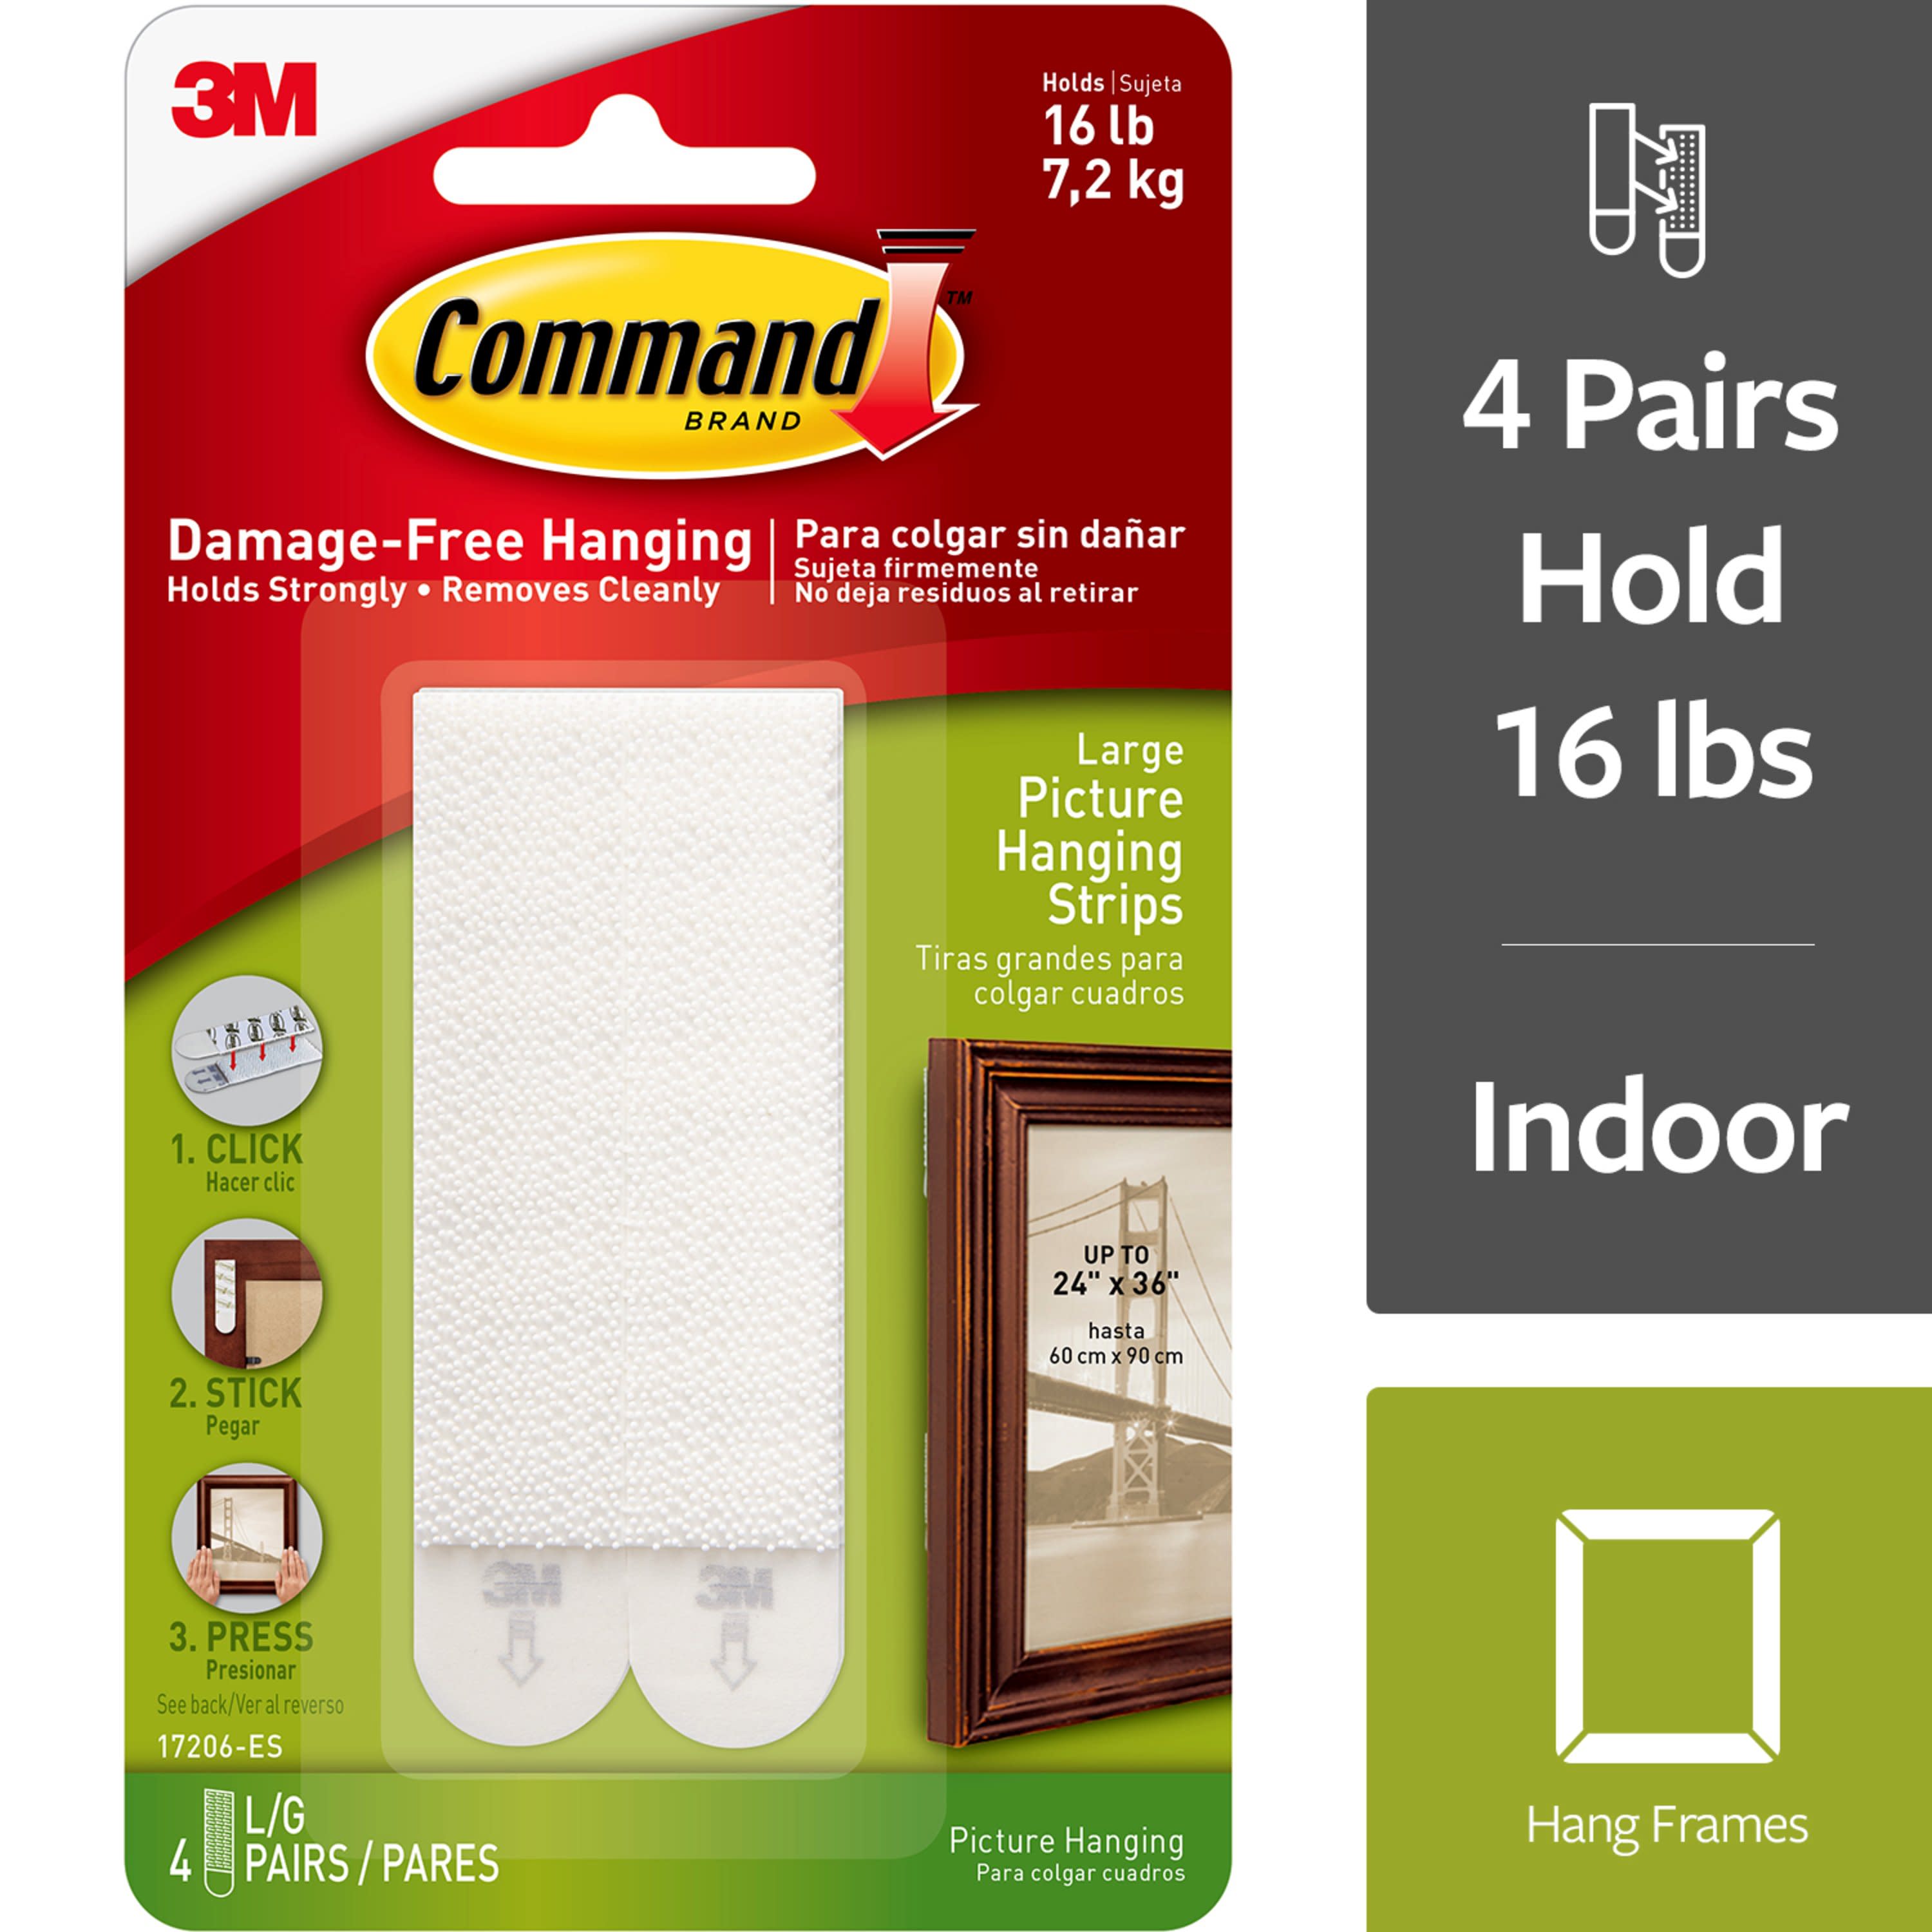 Pack of 4 3M Command Large Picture Hanging Strips for sale online 17206ES 